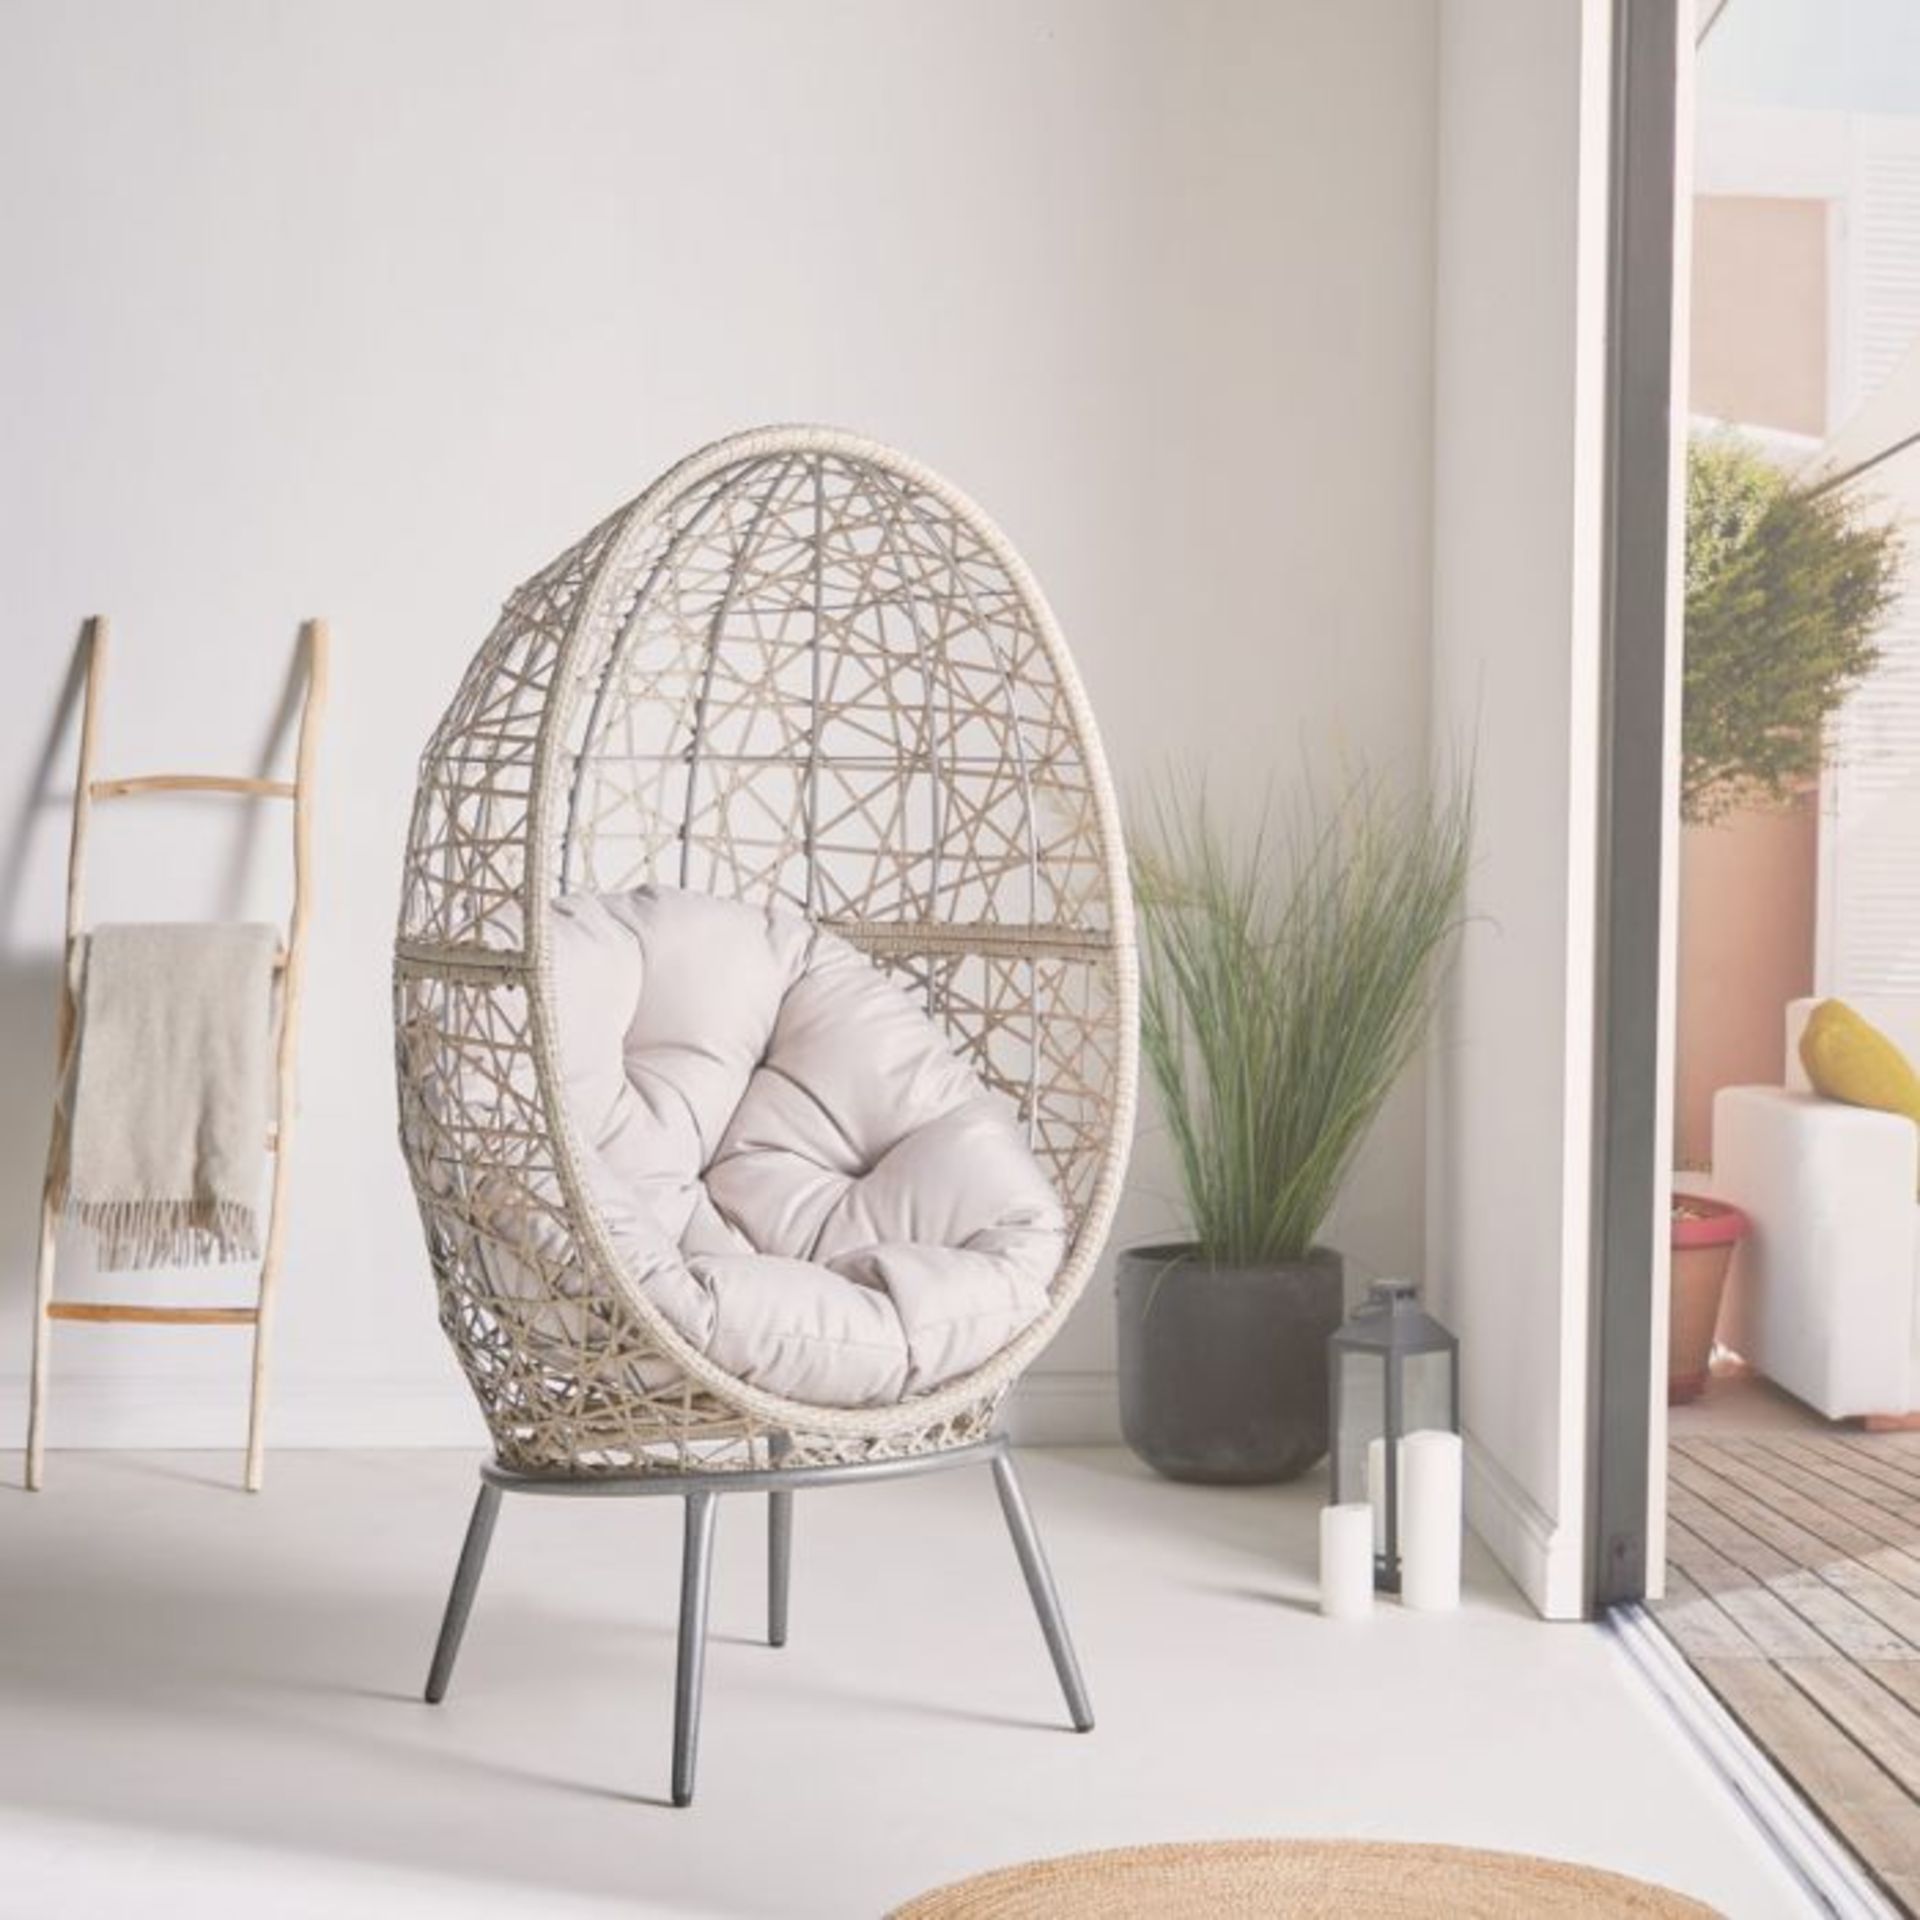 New Boxed Freestanding Natural Rattan Egg Chair. (REF516/R3TOP) Get cosy on this rattan cocoon